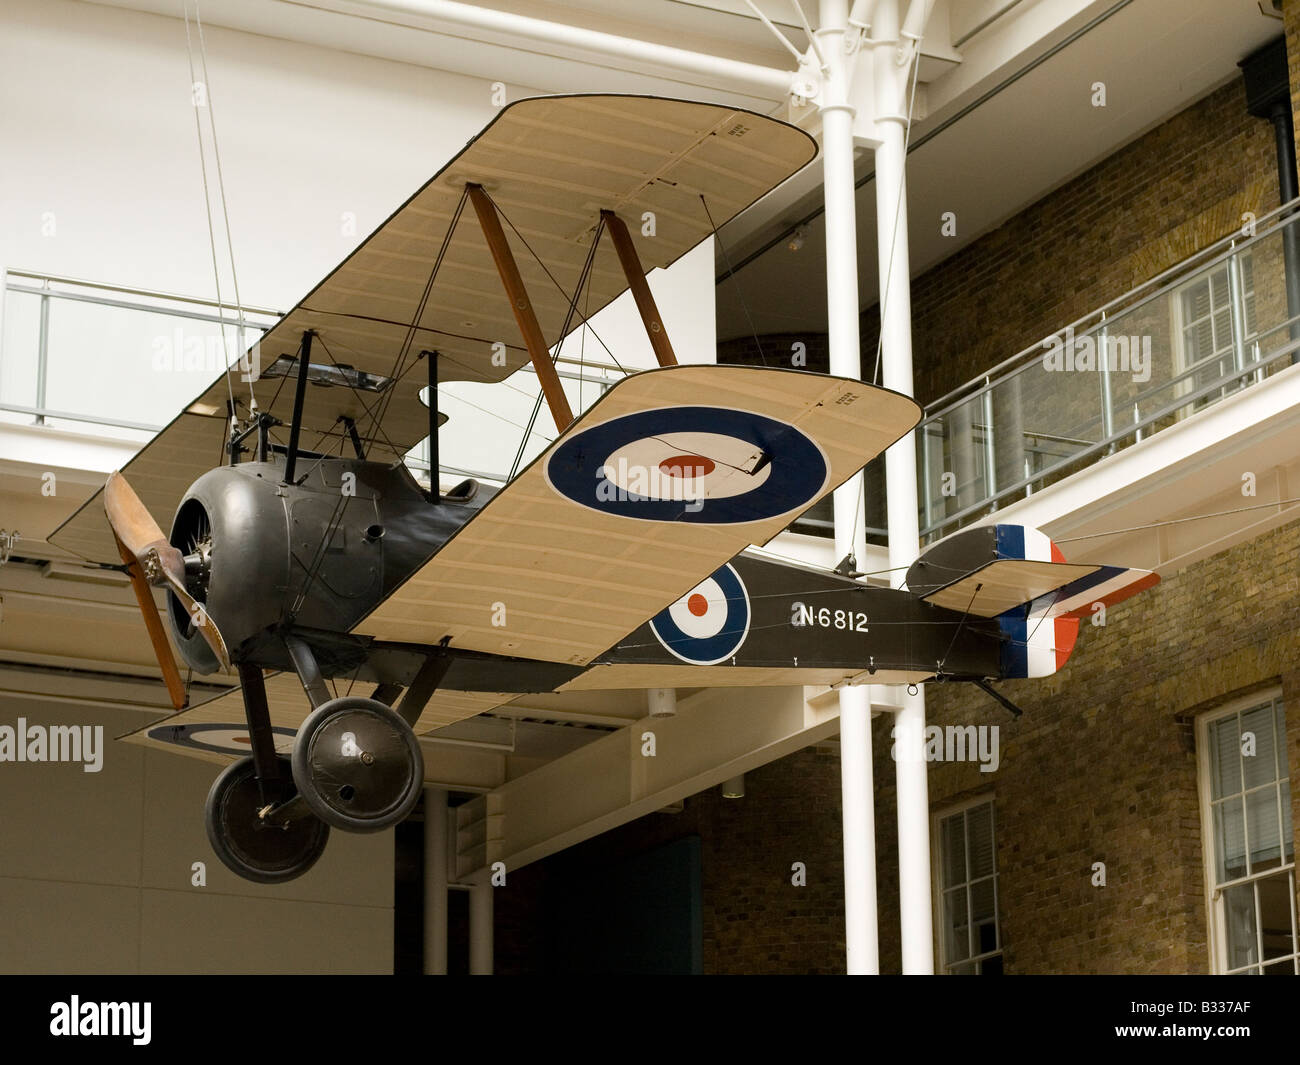 aircraft at Imperial War Museum Stock Photo